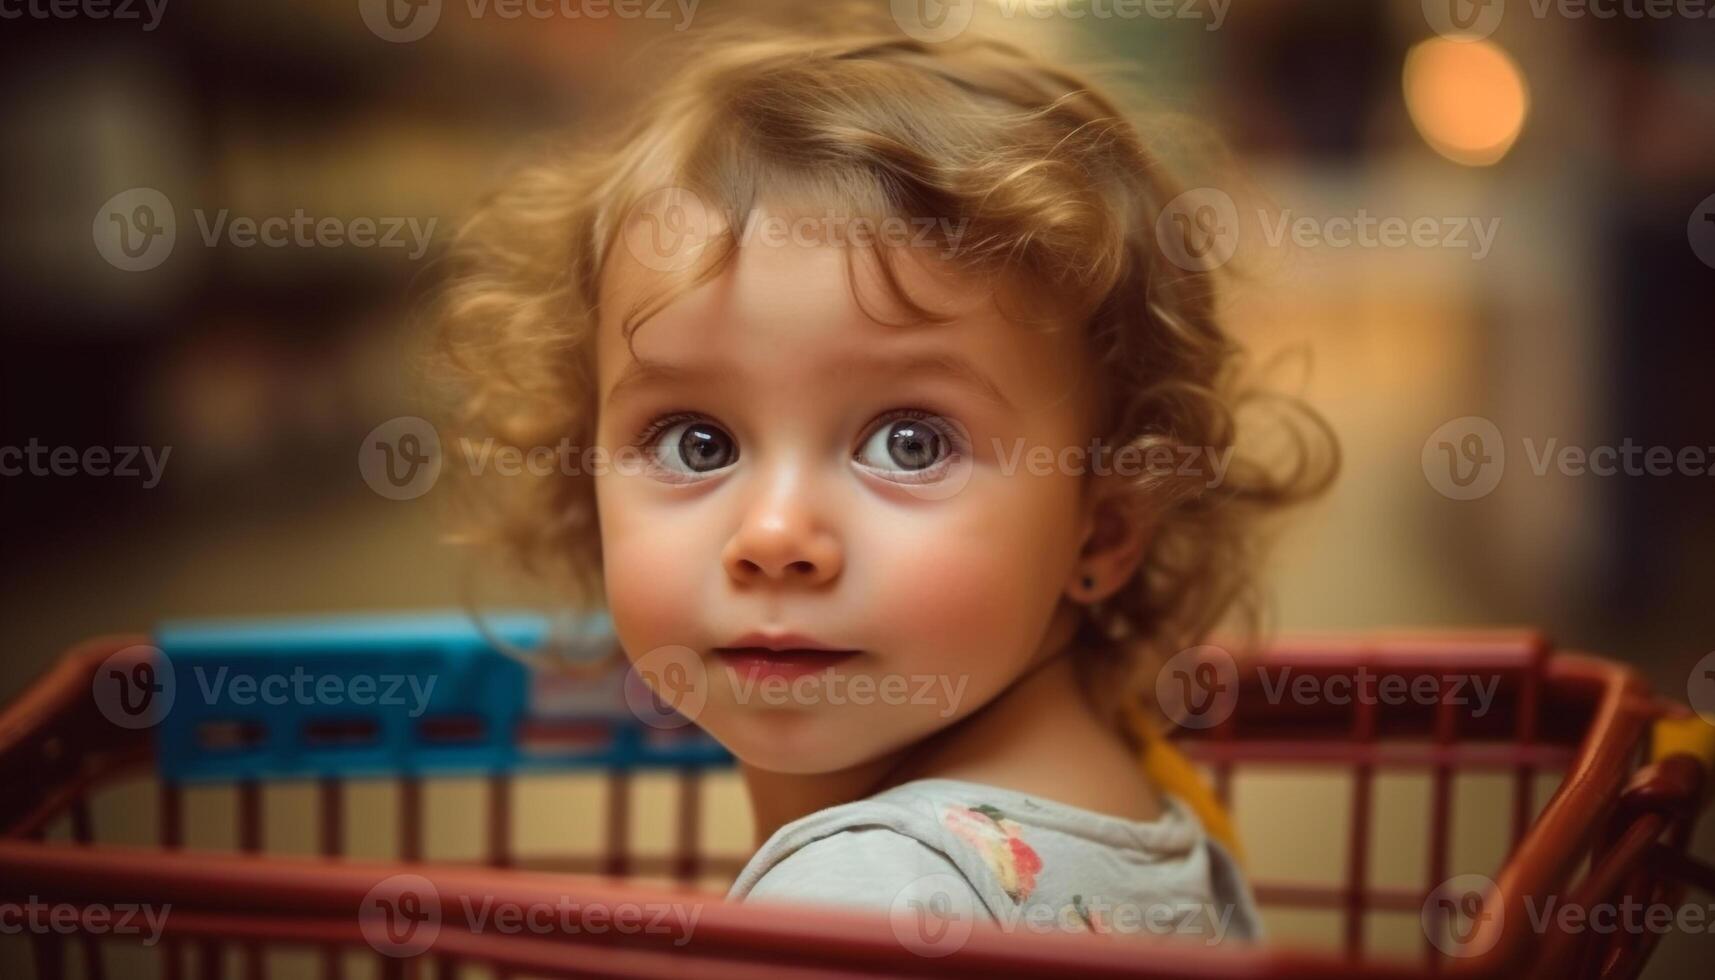 Cute baby girl sitting on chair, holding toy, smiling happily generated by AI photo